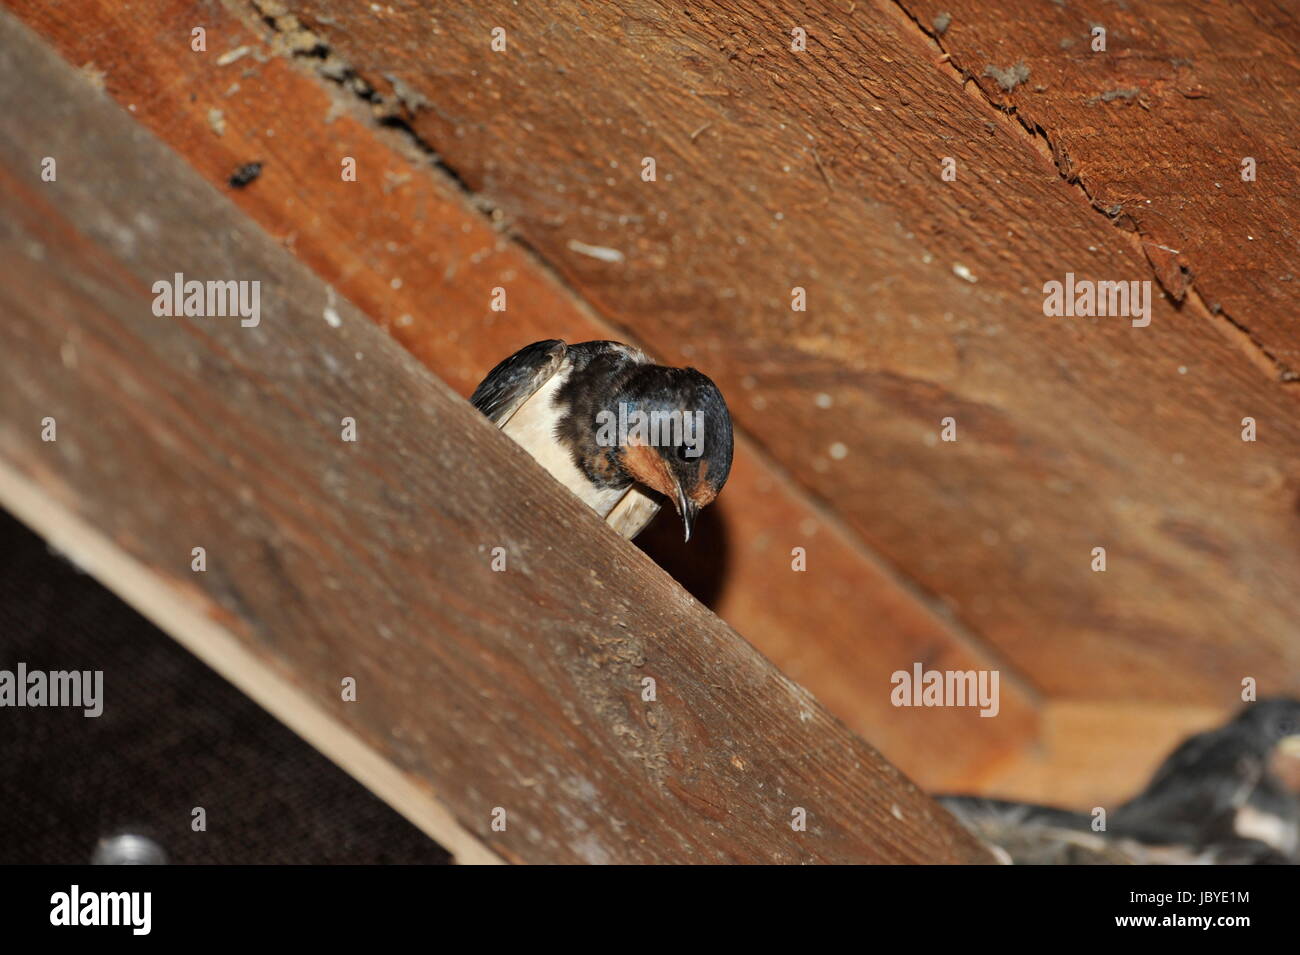 Swallow nest with chicks at Steinhuder Meer,Germany. Stock Photo